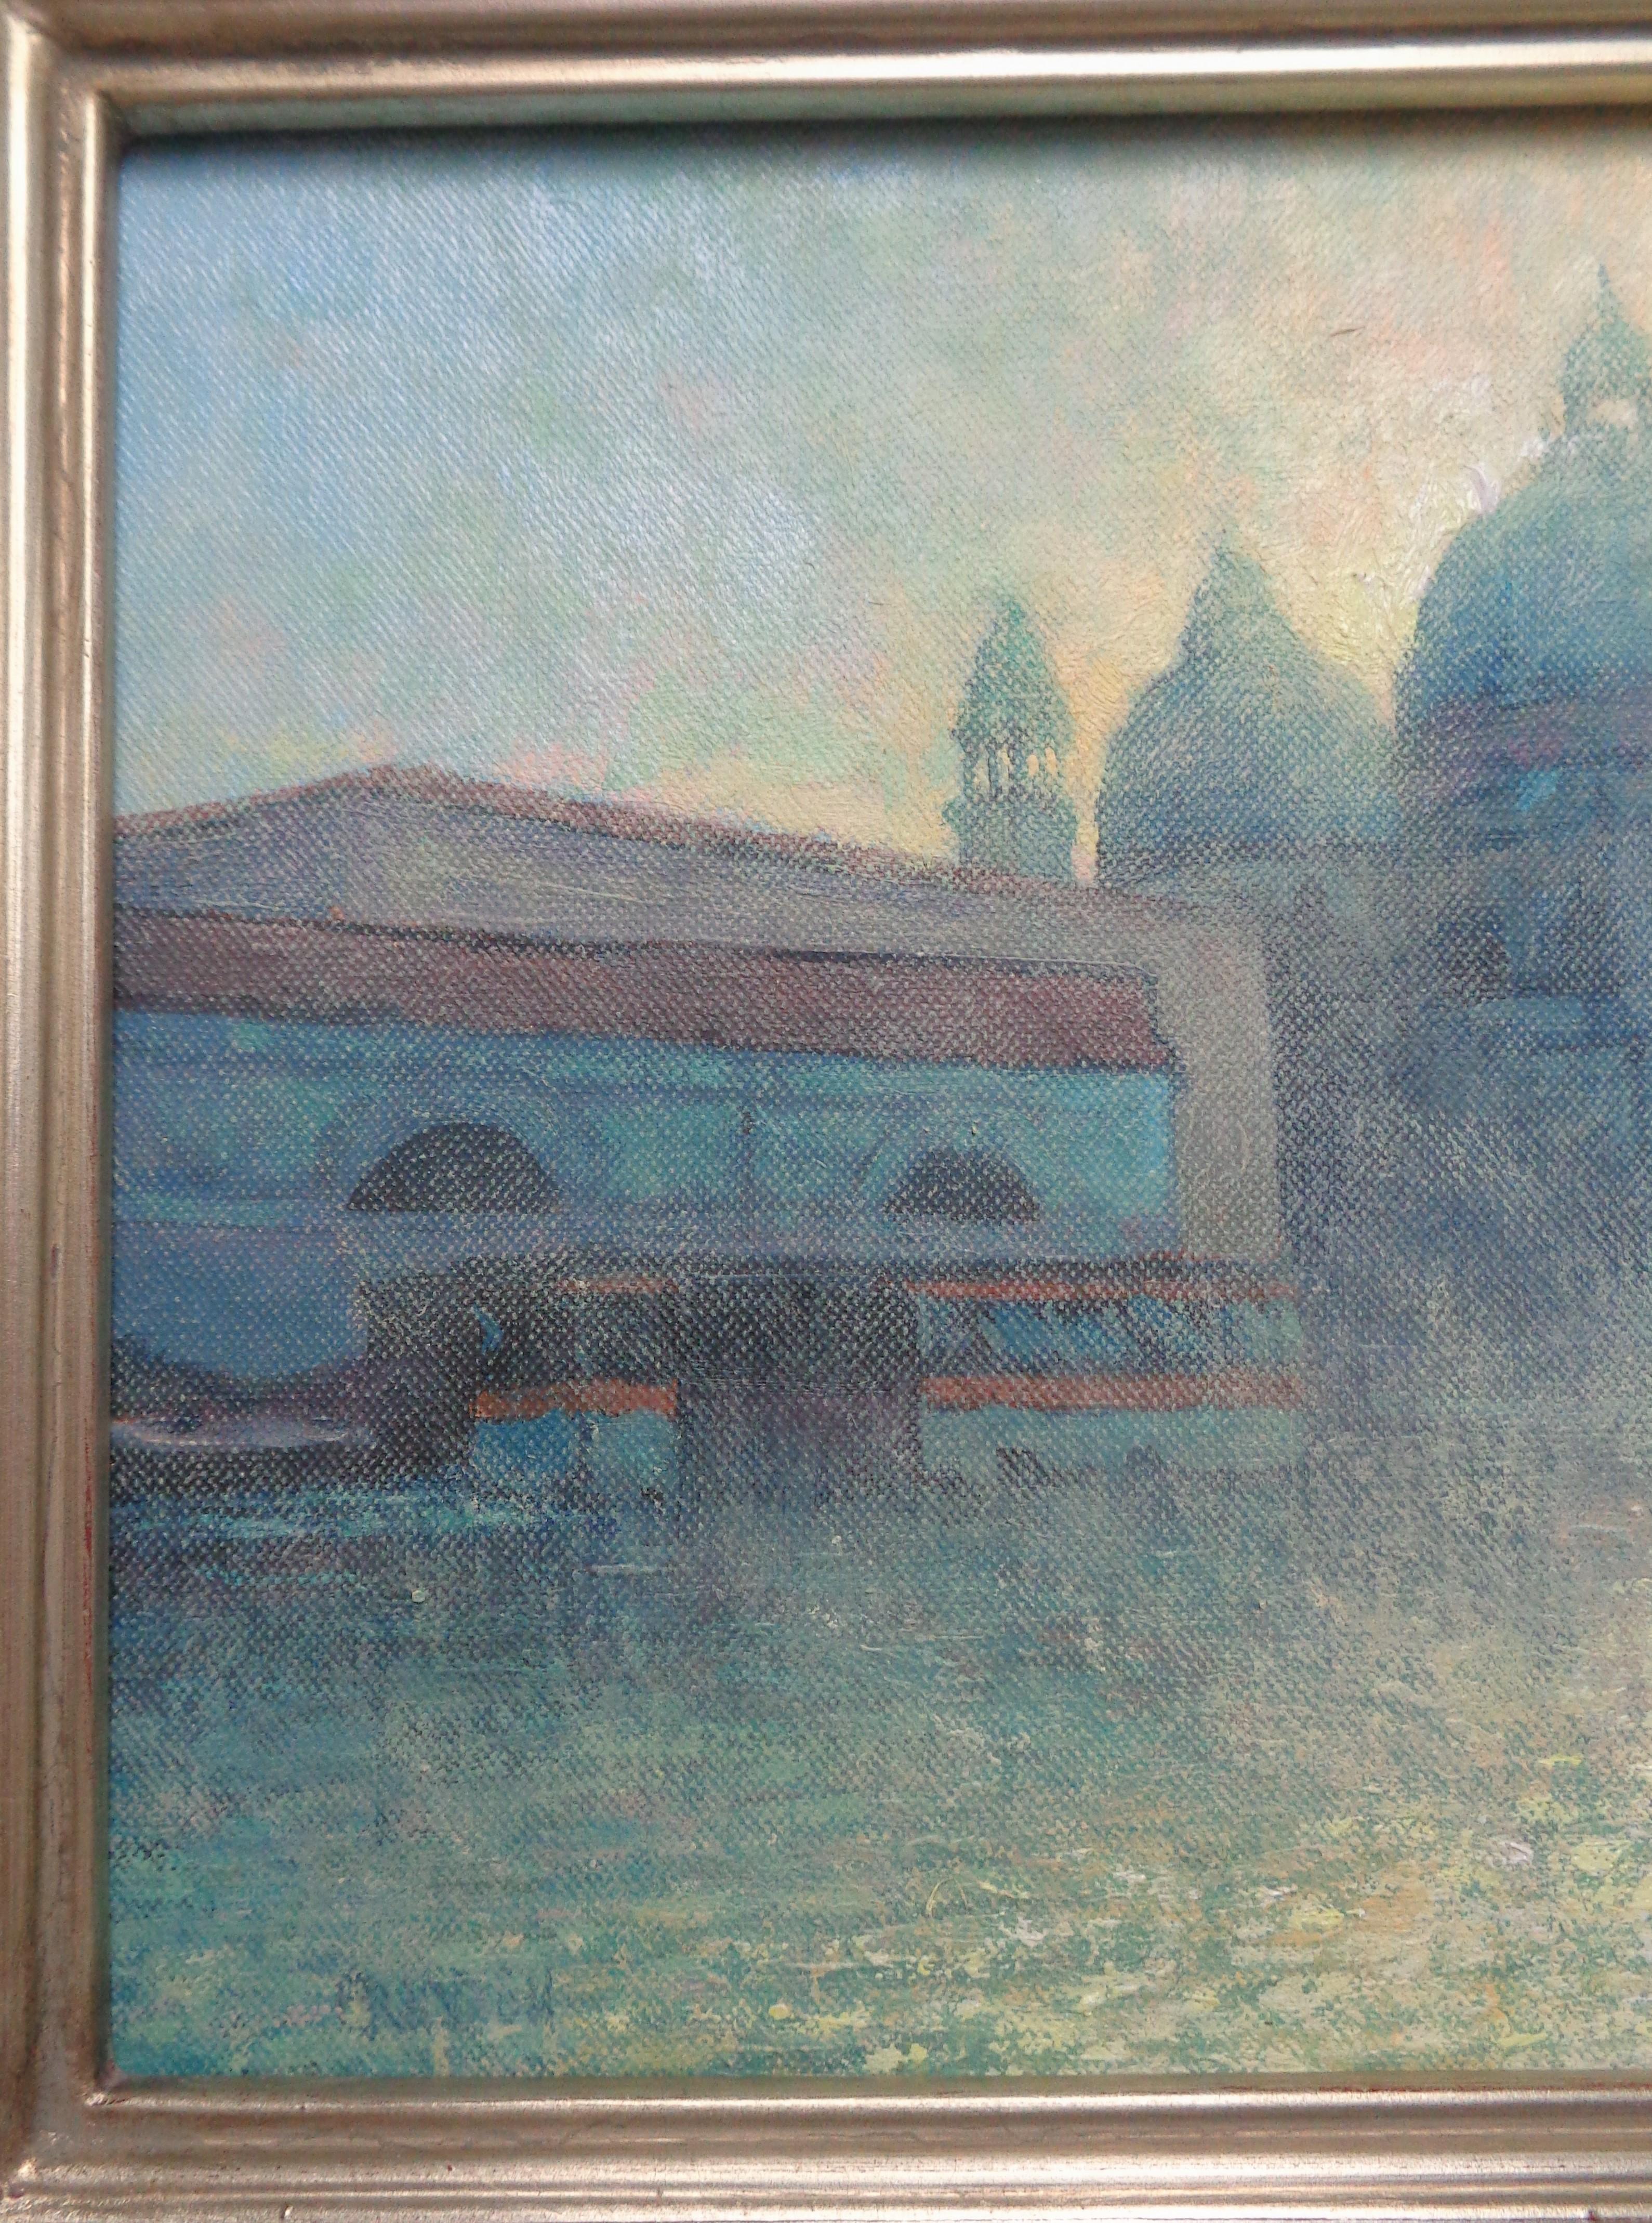  Impressionistic Seascape Venice Painting Michael Budden Morning Light For Sale 1